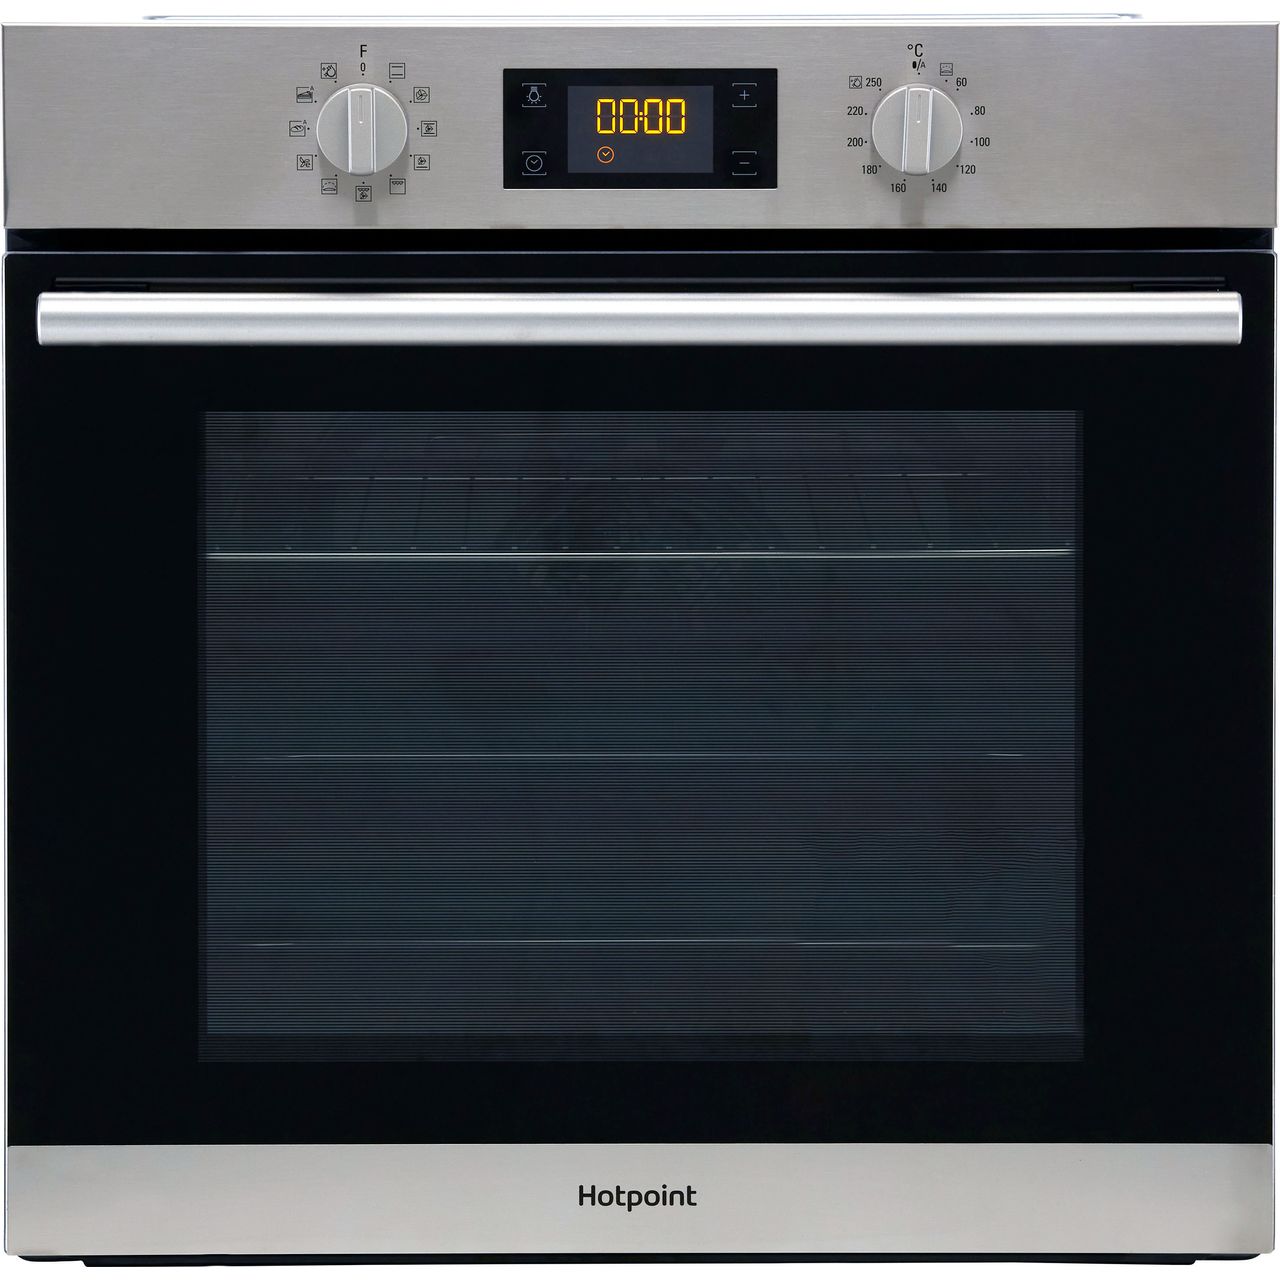 Hotpoint Class 2 Electric Single Oven - Stainless Steel - A+ Rated